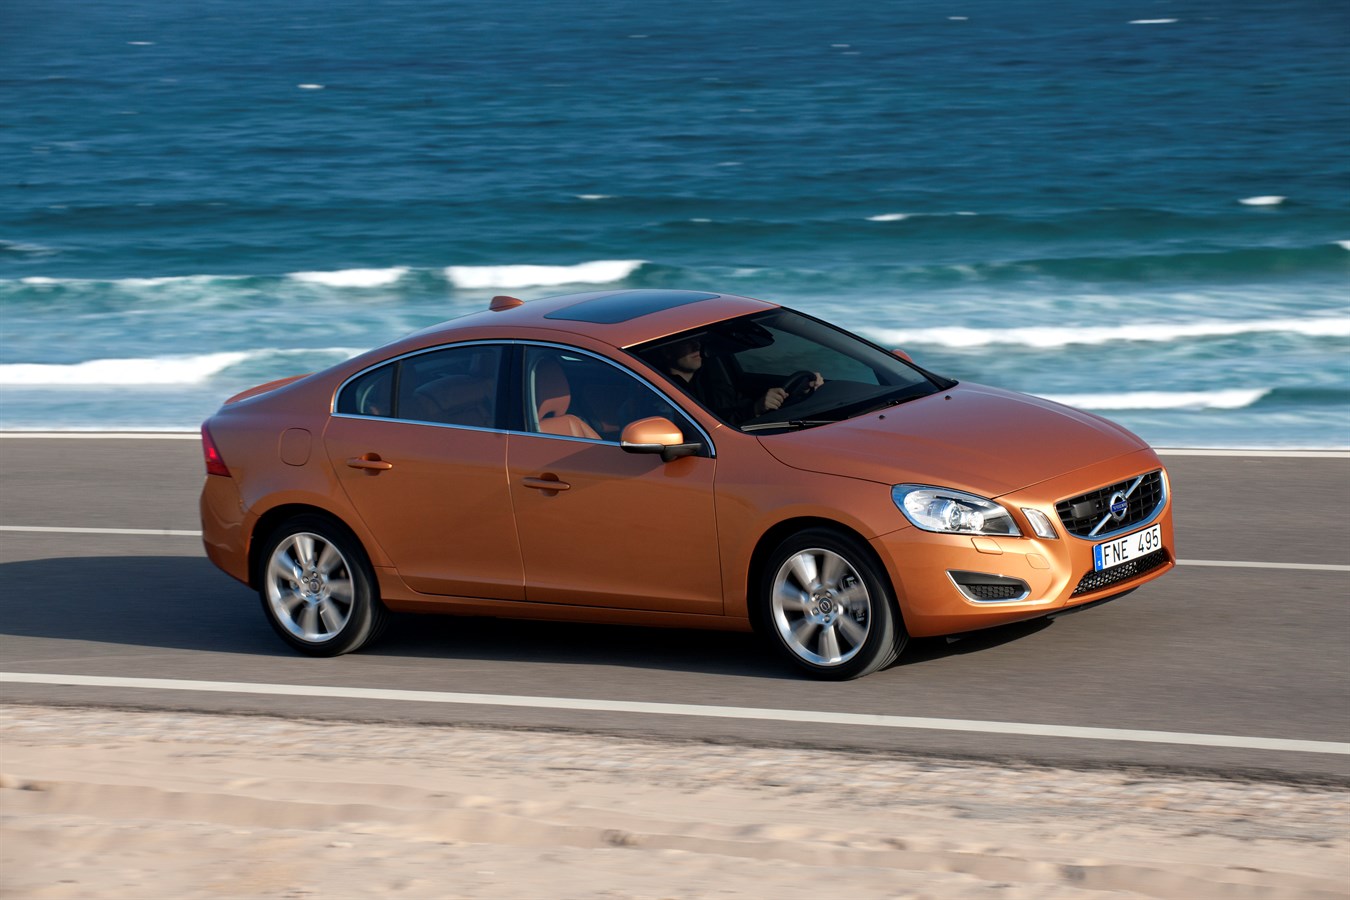 The all-new Volvo S60 on the road in the region of Sintra, Portugal